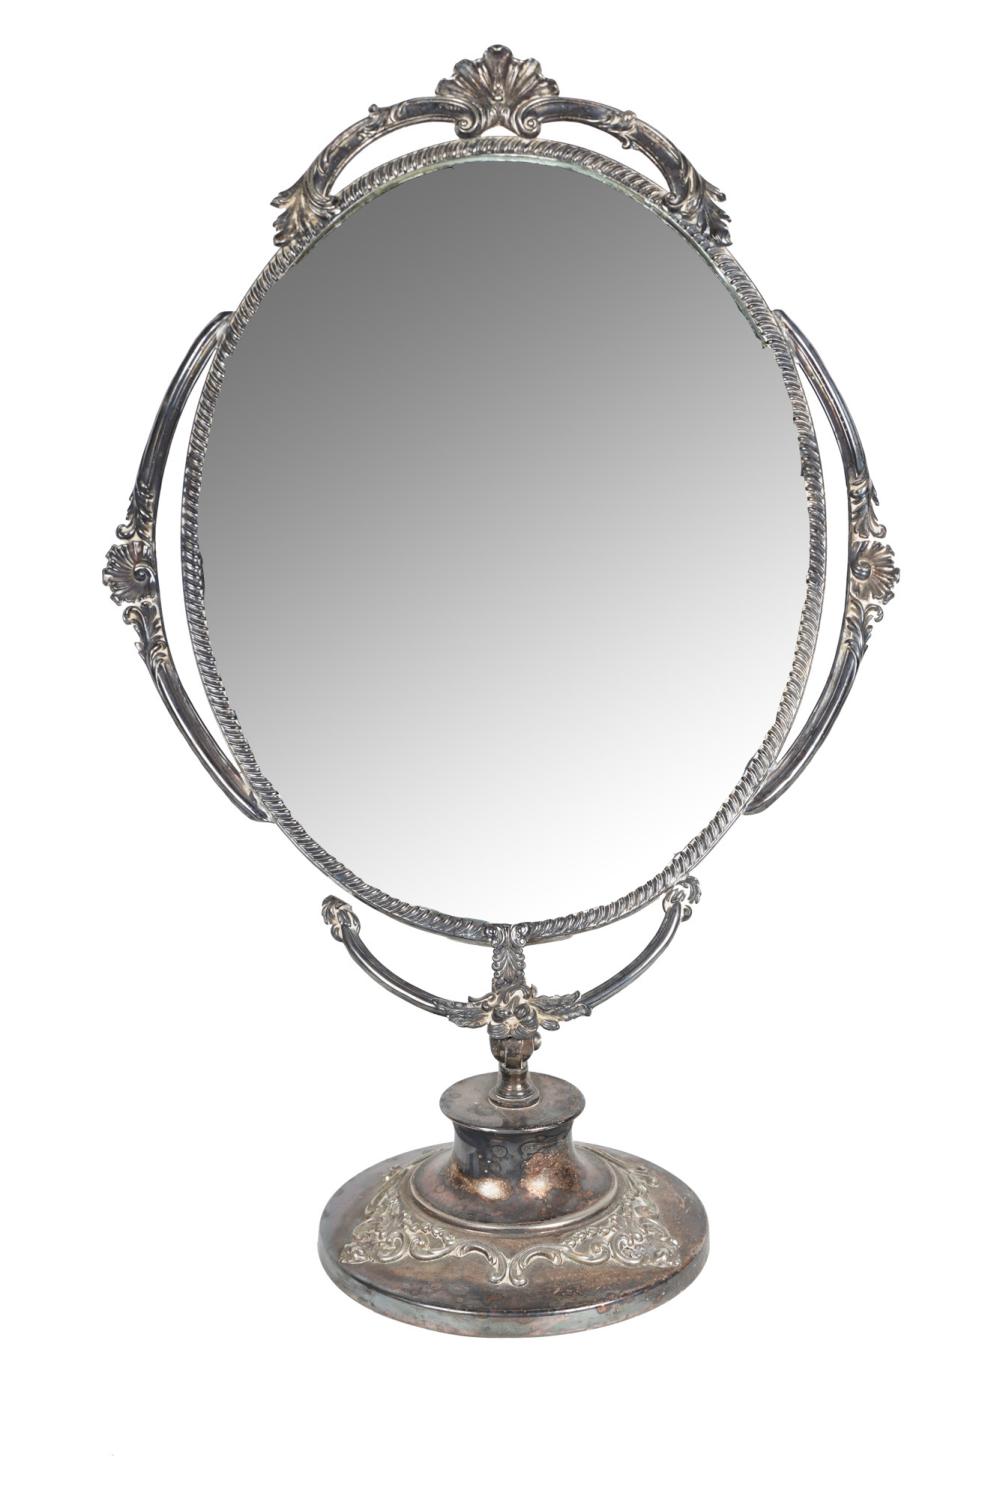 SILVERPLATED TABLE MIRRORwith adjustable